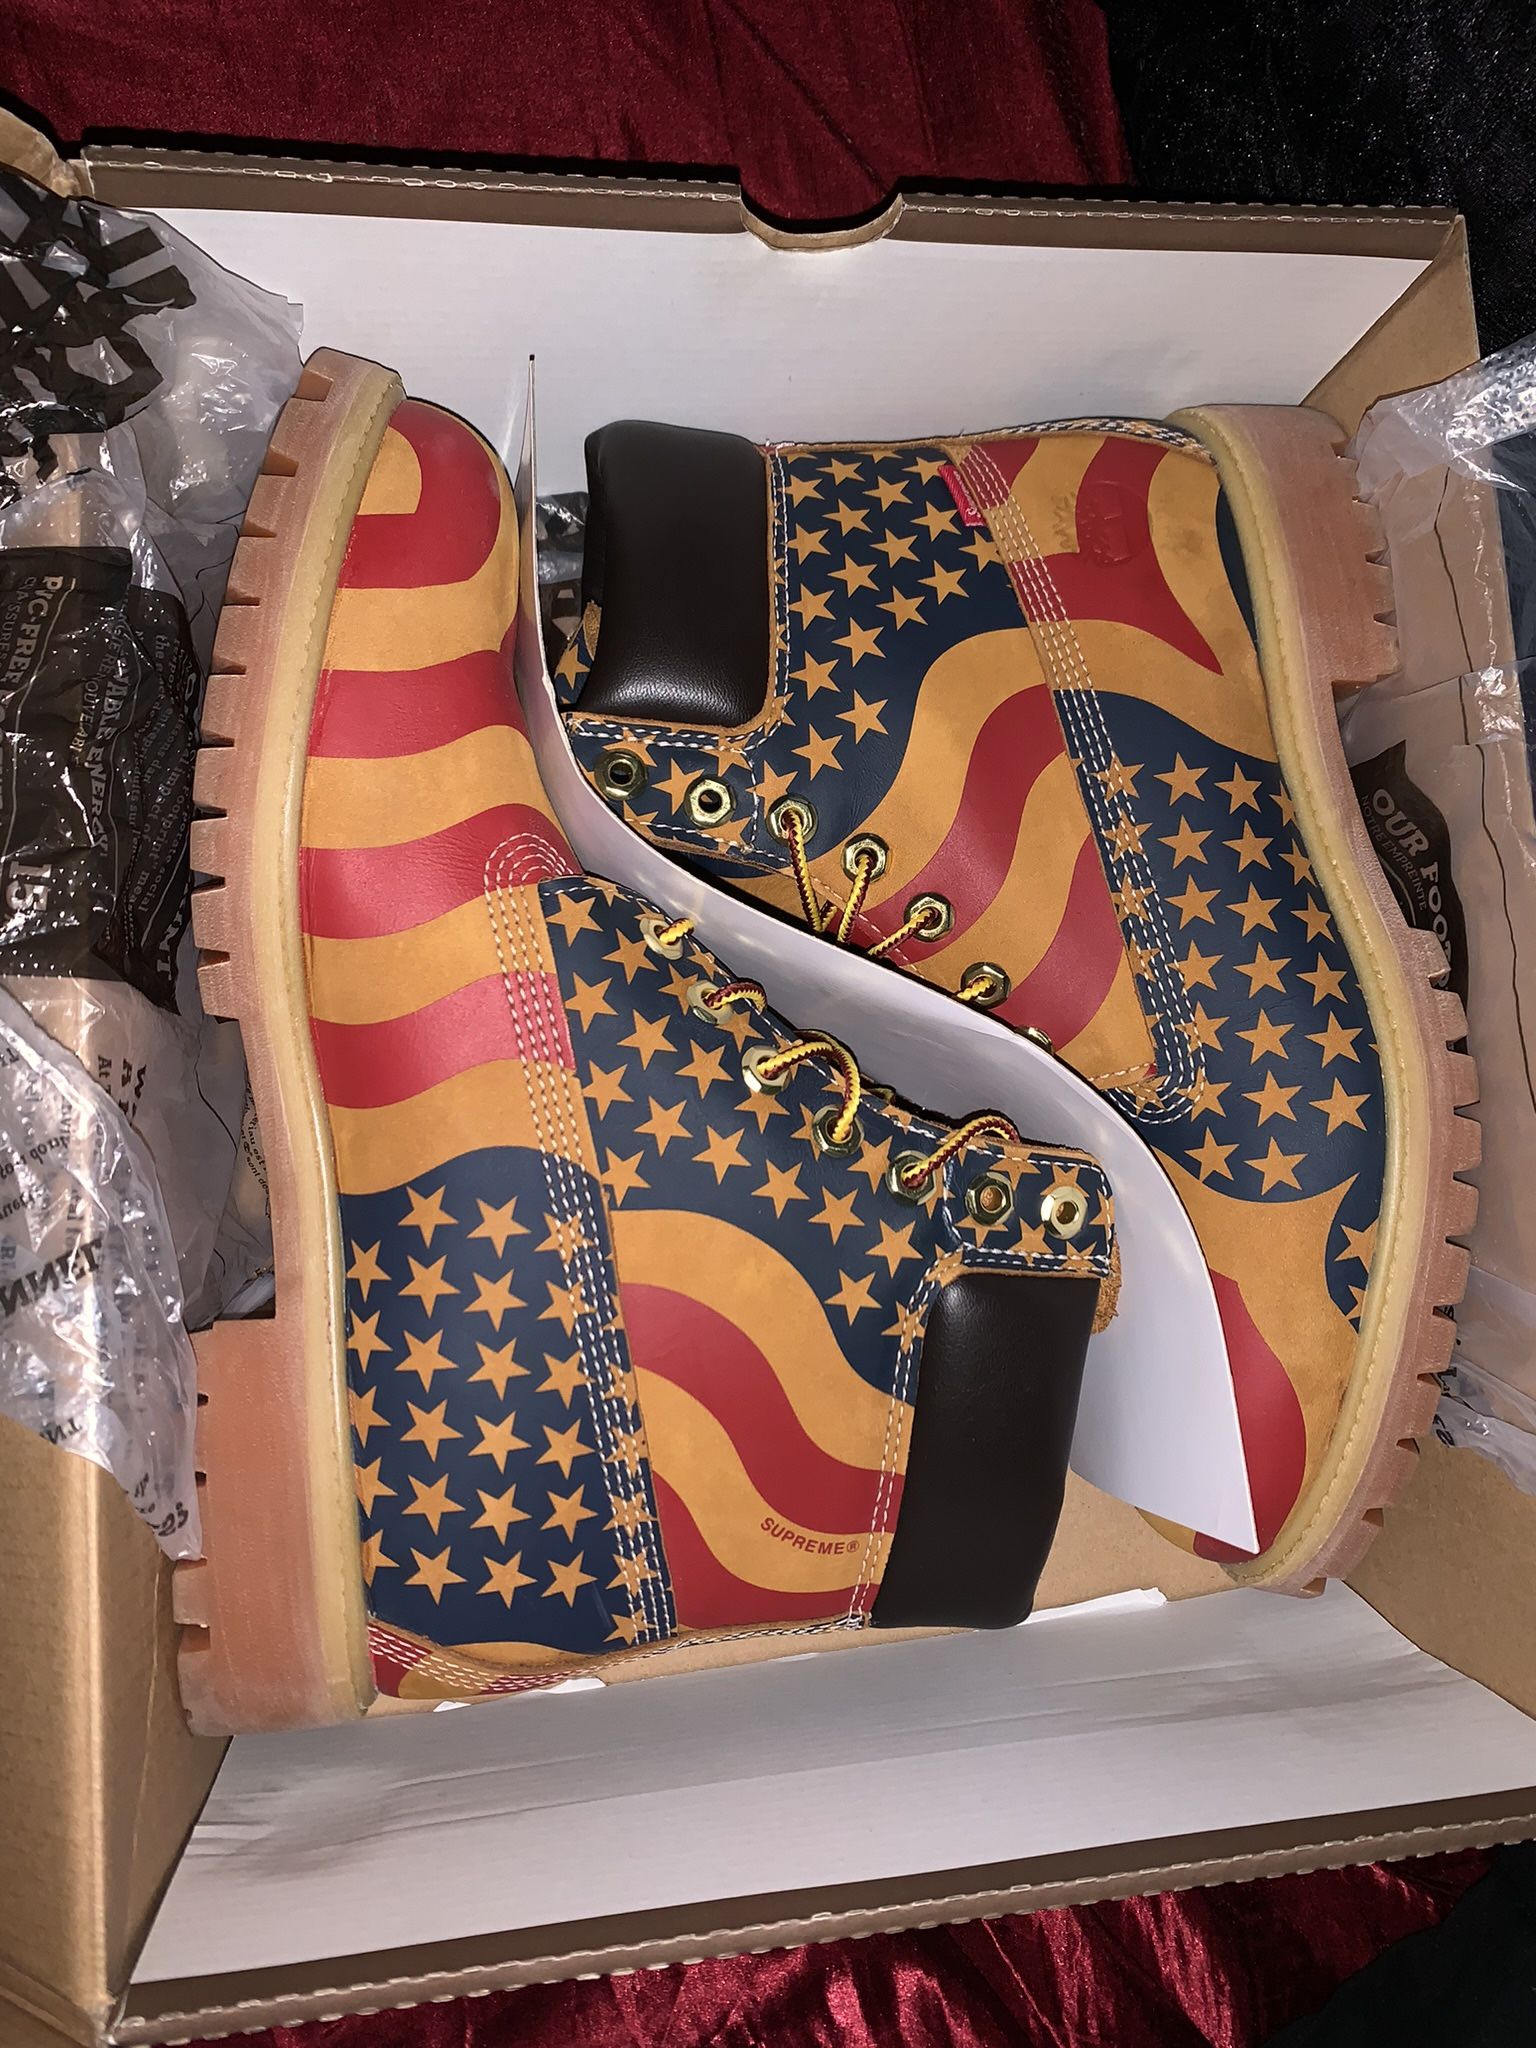 Supreme X Timberland 3-Eye Classic Lug for Sale in Merced, CA - OfferUp